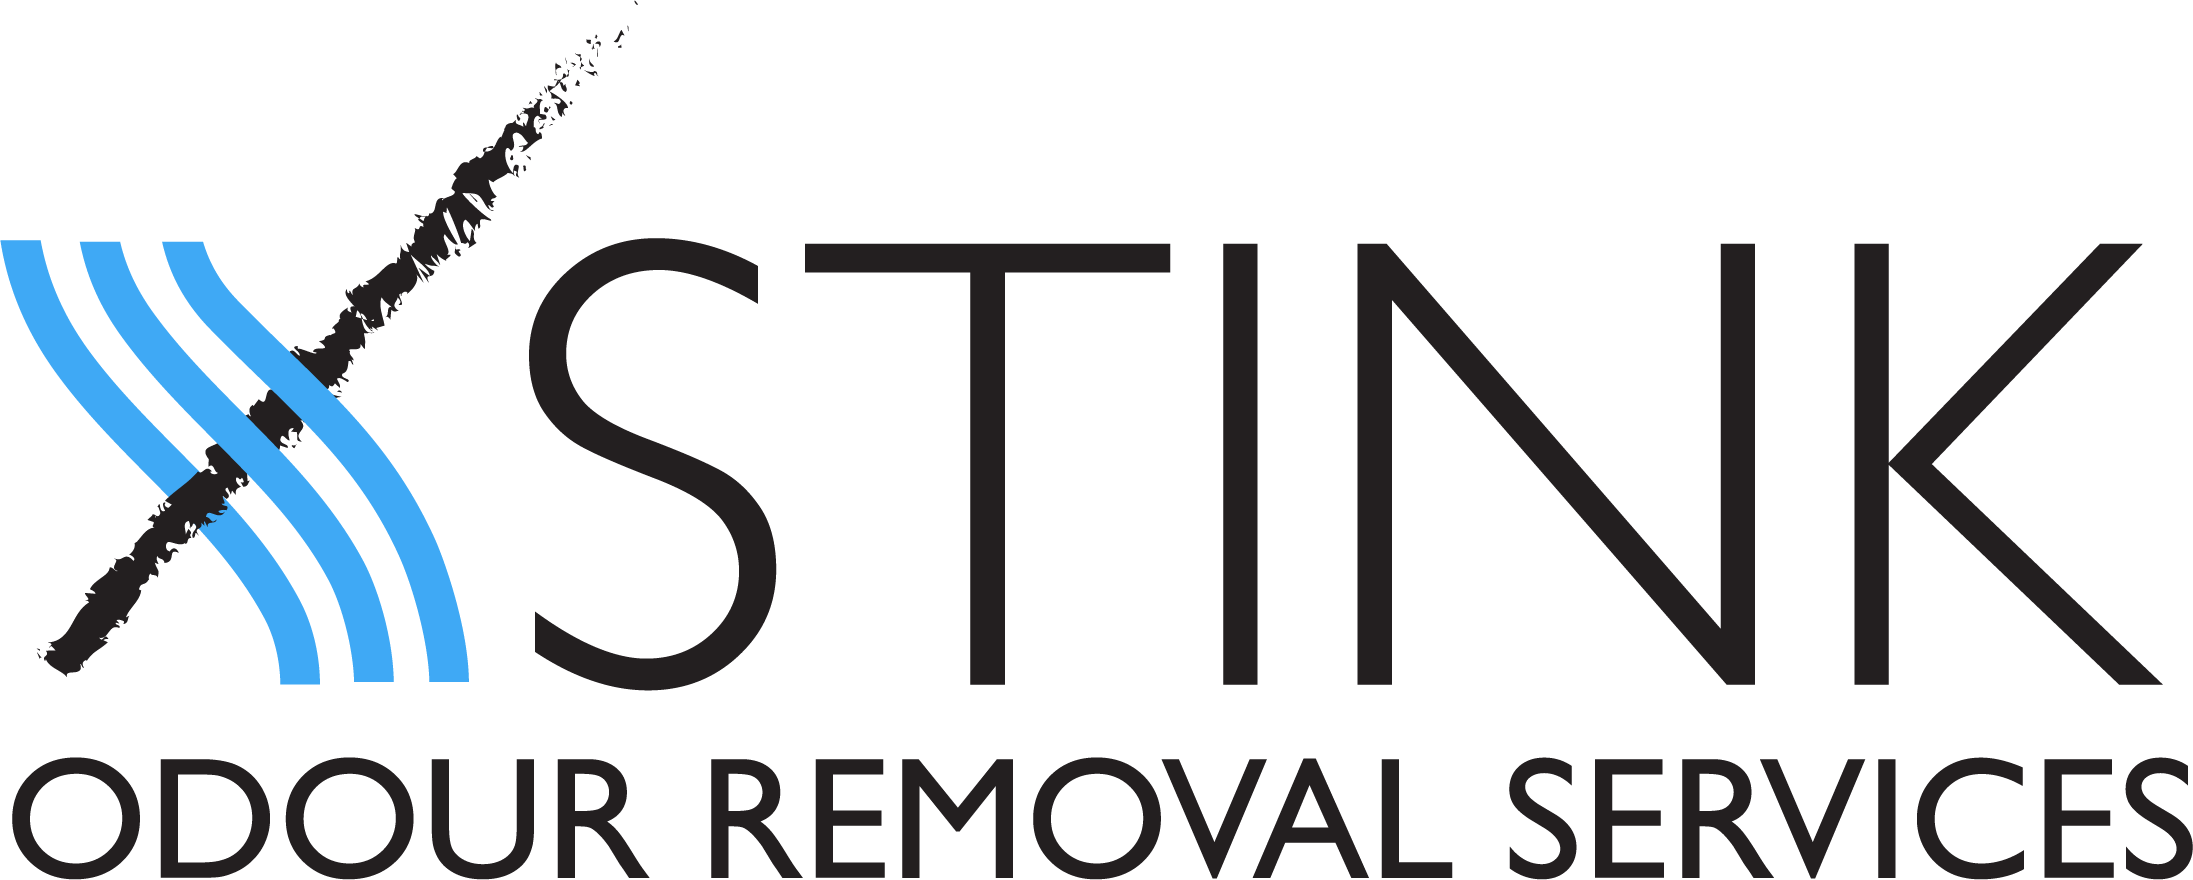 xstink odour removal services logo